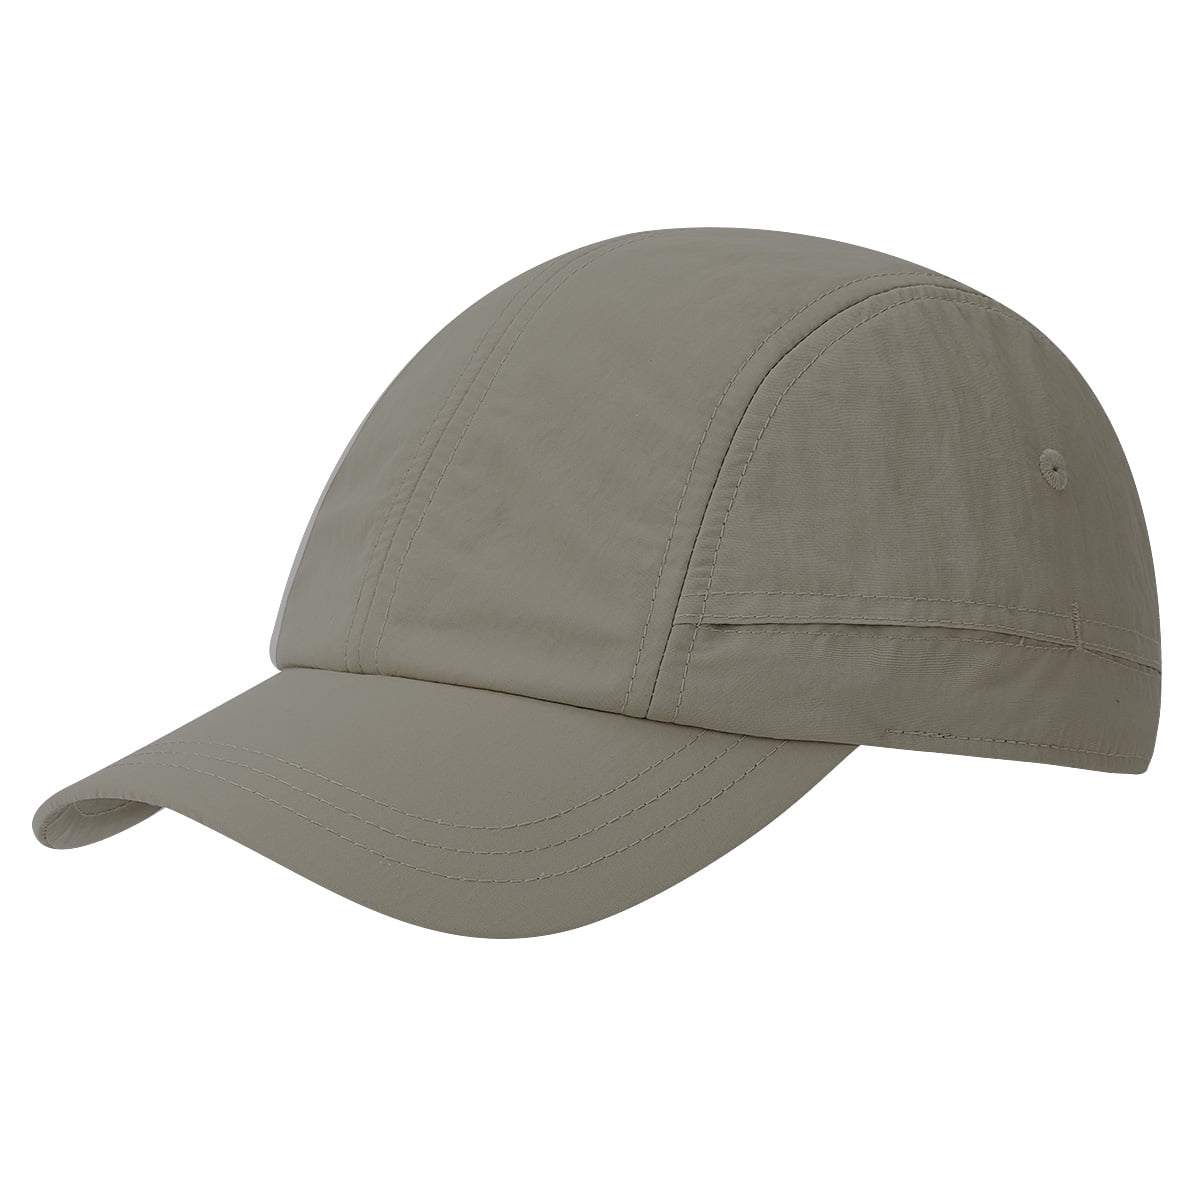 ZOWYA Outdoor Sport Hat, Quick-Dry Breathable Soft Nepal